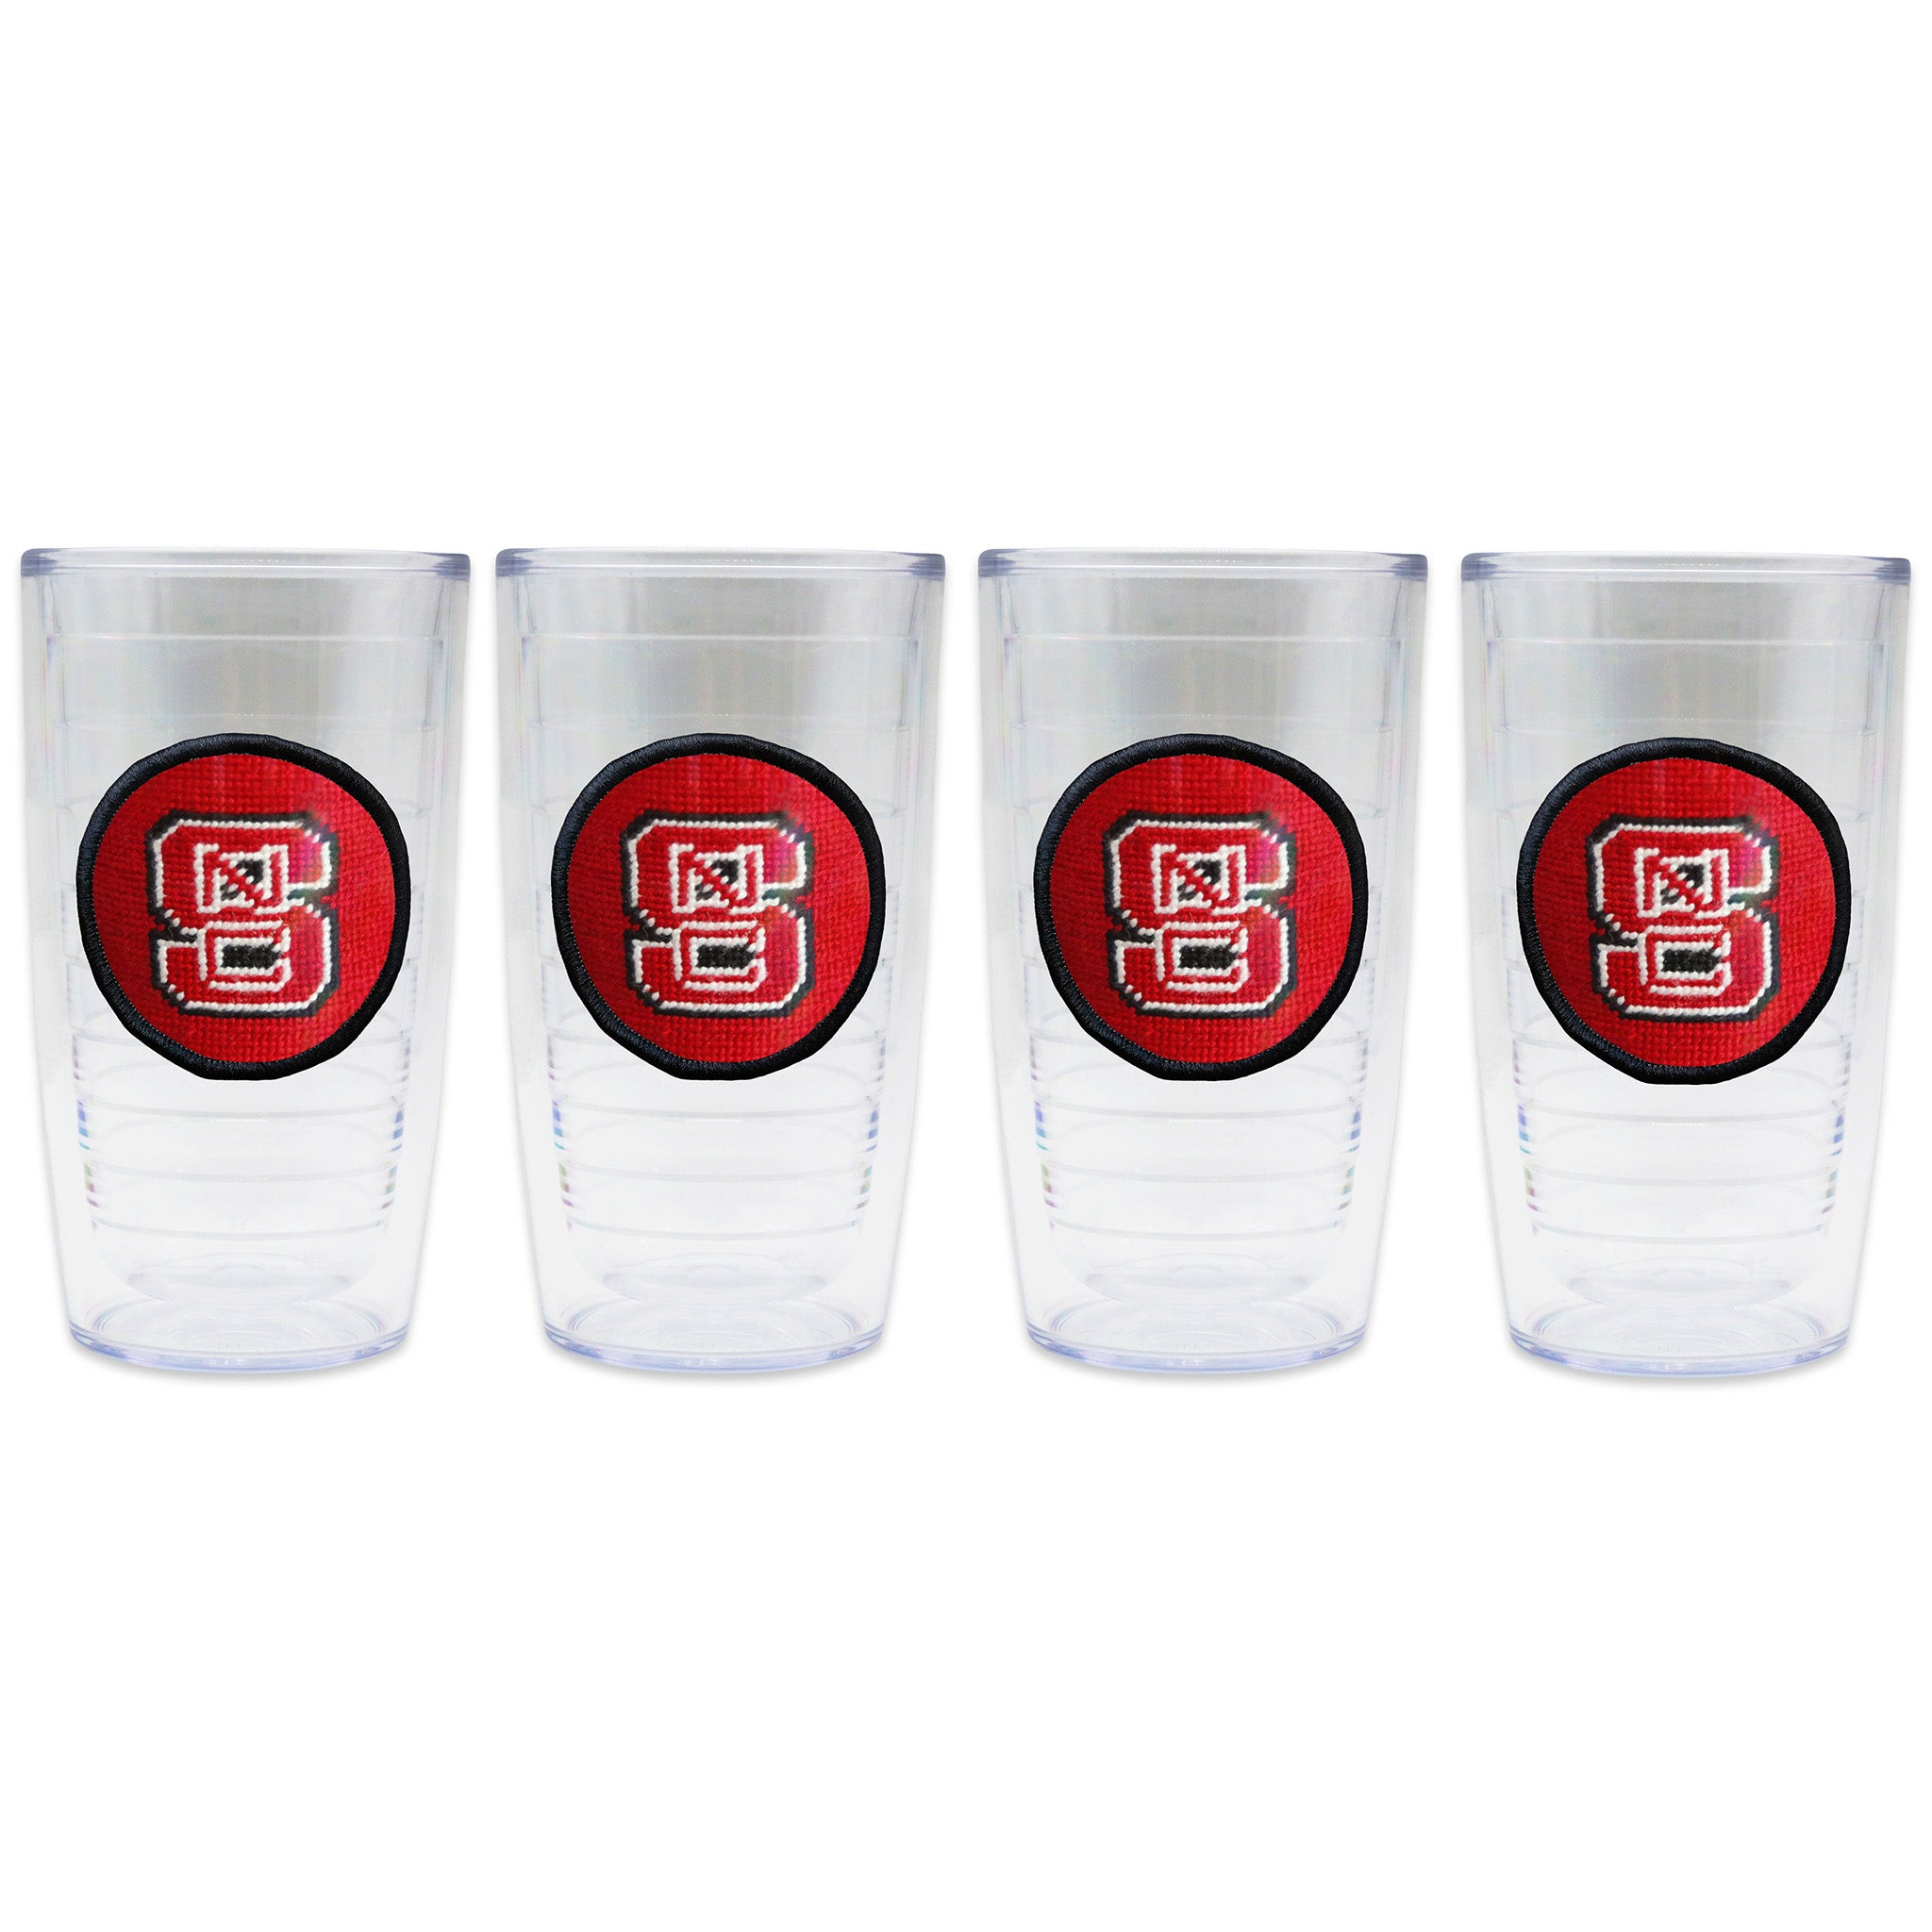 NC State Tervis Tumbler (Red) (Black Edge)